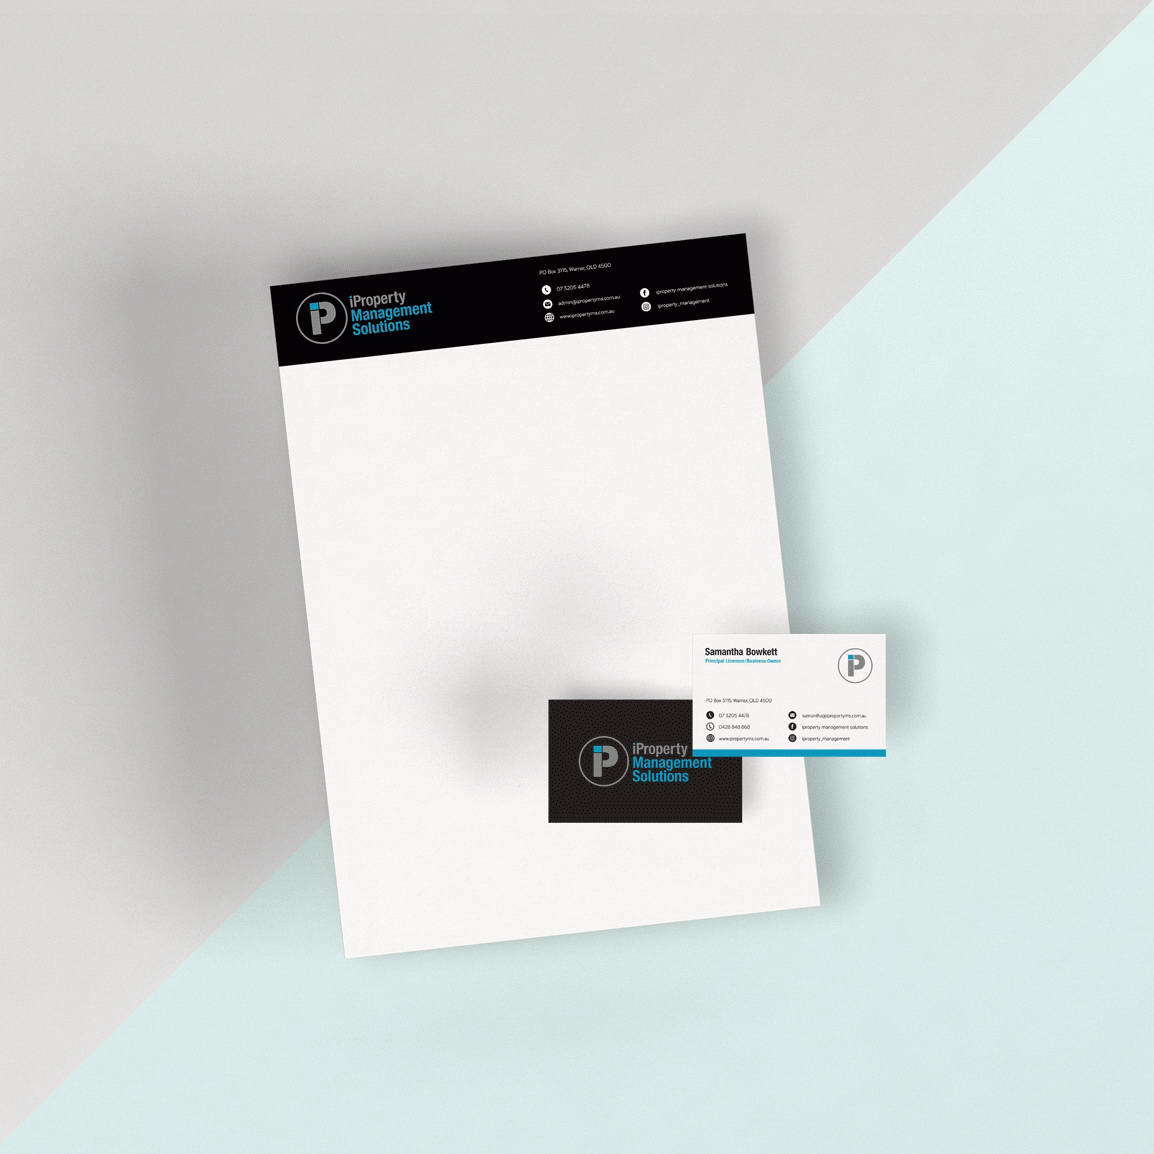 iproperty management solutions branded letterhead and business card mockups